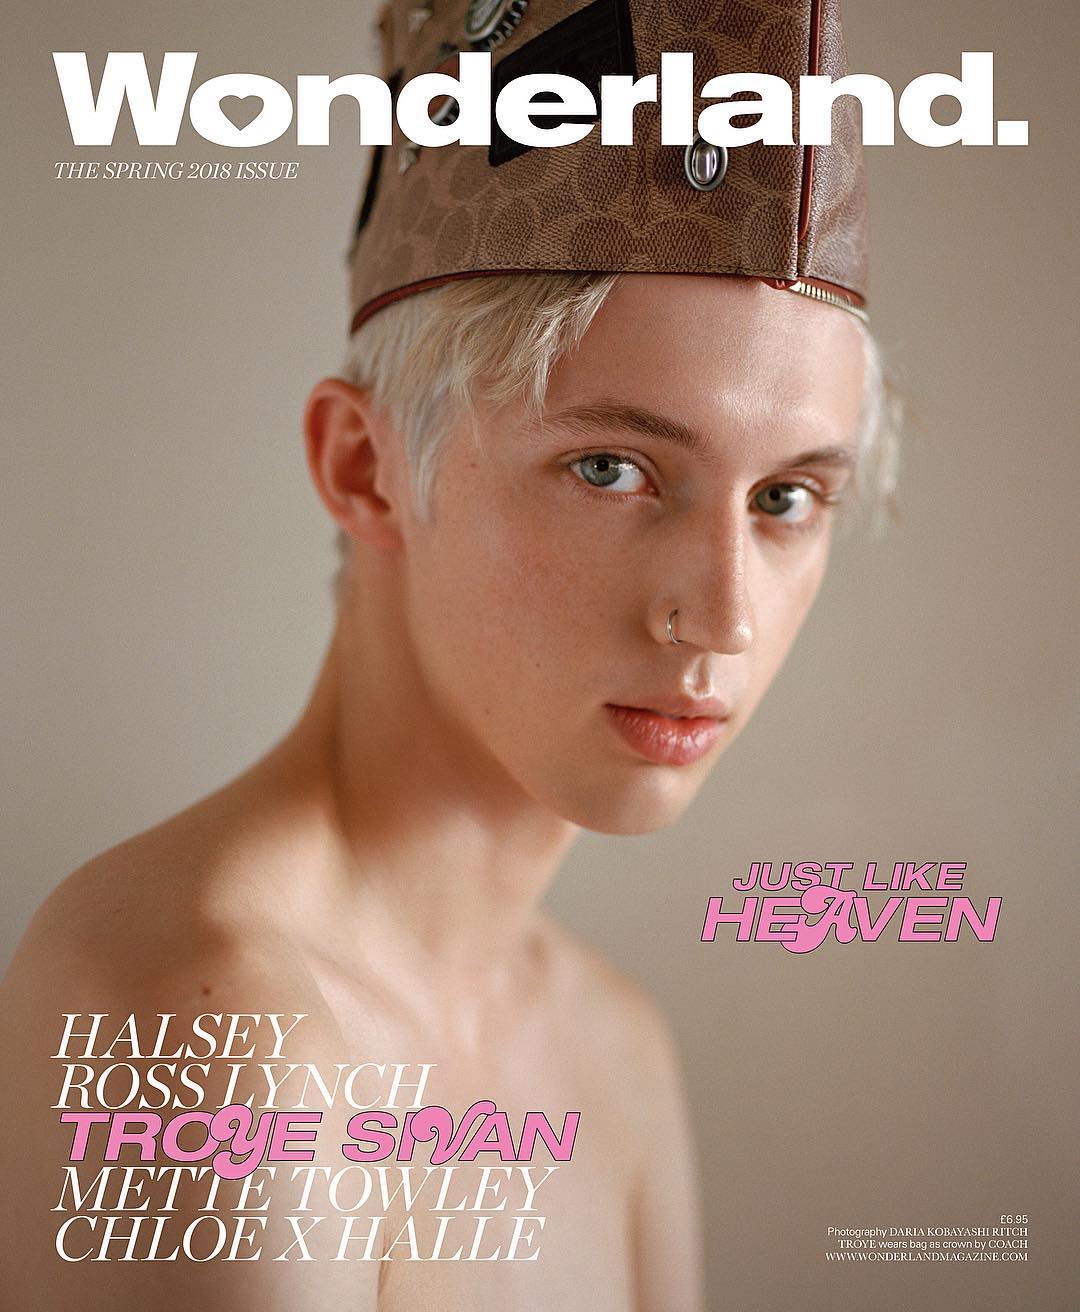 Troye Sivan on the cover of Wonderland